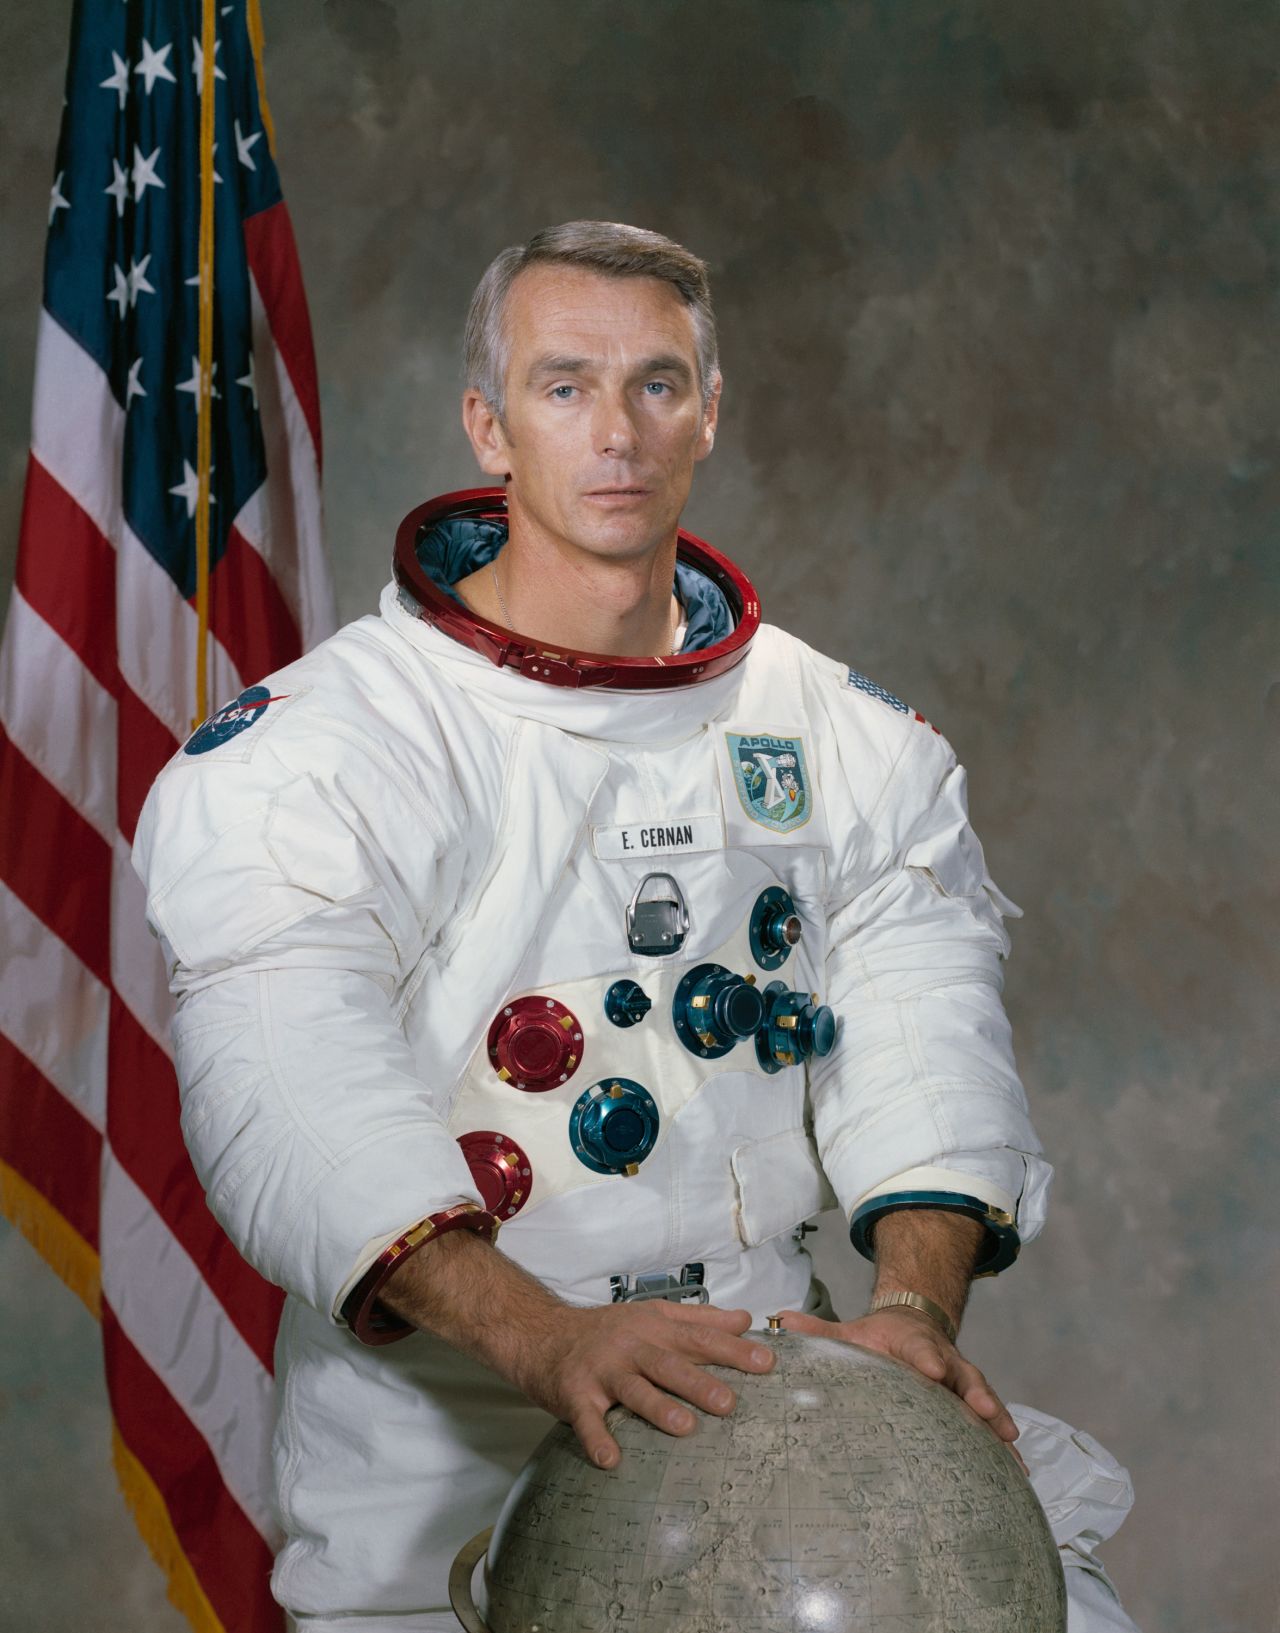 <a href="http://www.cnn.com/2017/01/16/us/eugene-cernan-dies/index.html">Eugene A. Cernan,</a> the last astronaut to leave his footprints on the surface of the moon, died January 16, NASA said. He was 82.